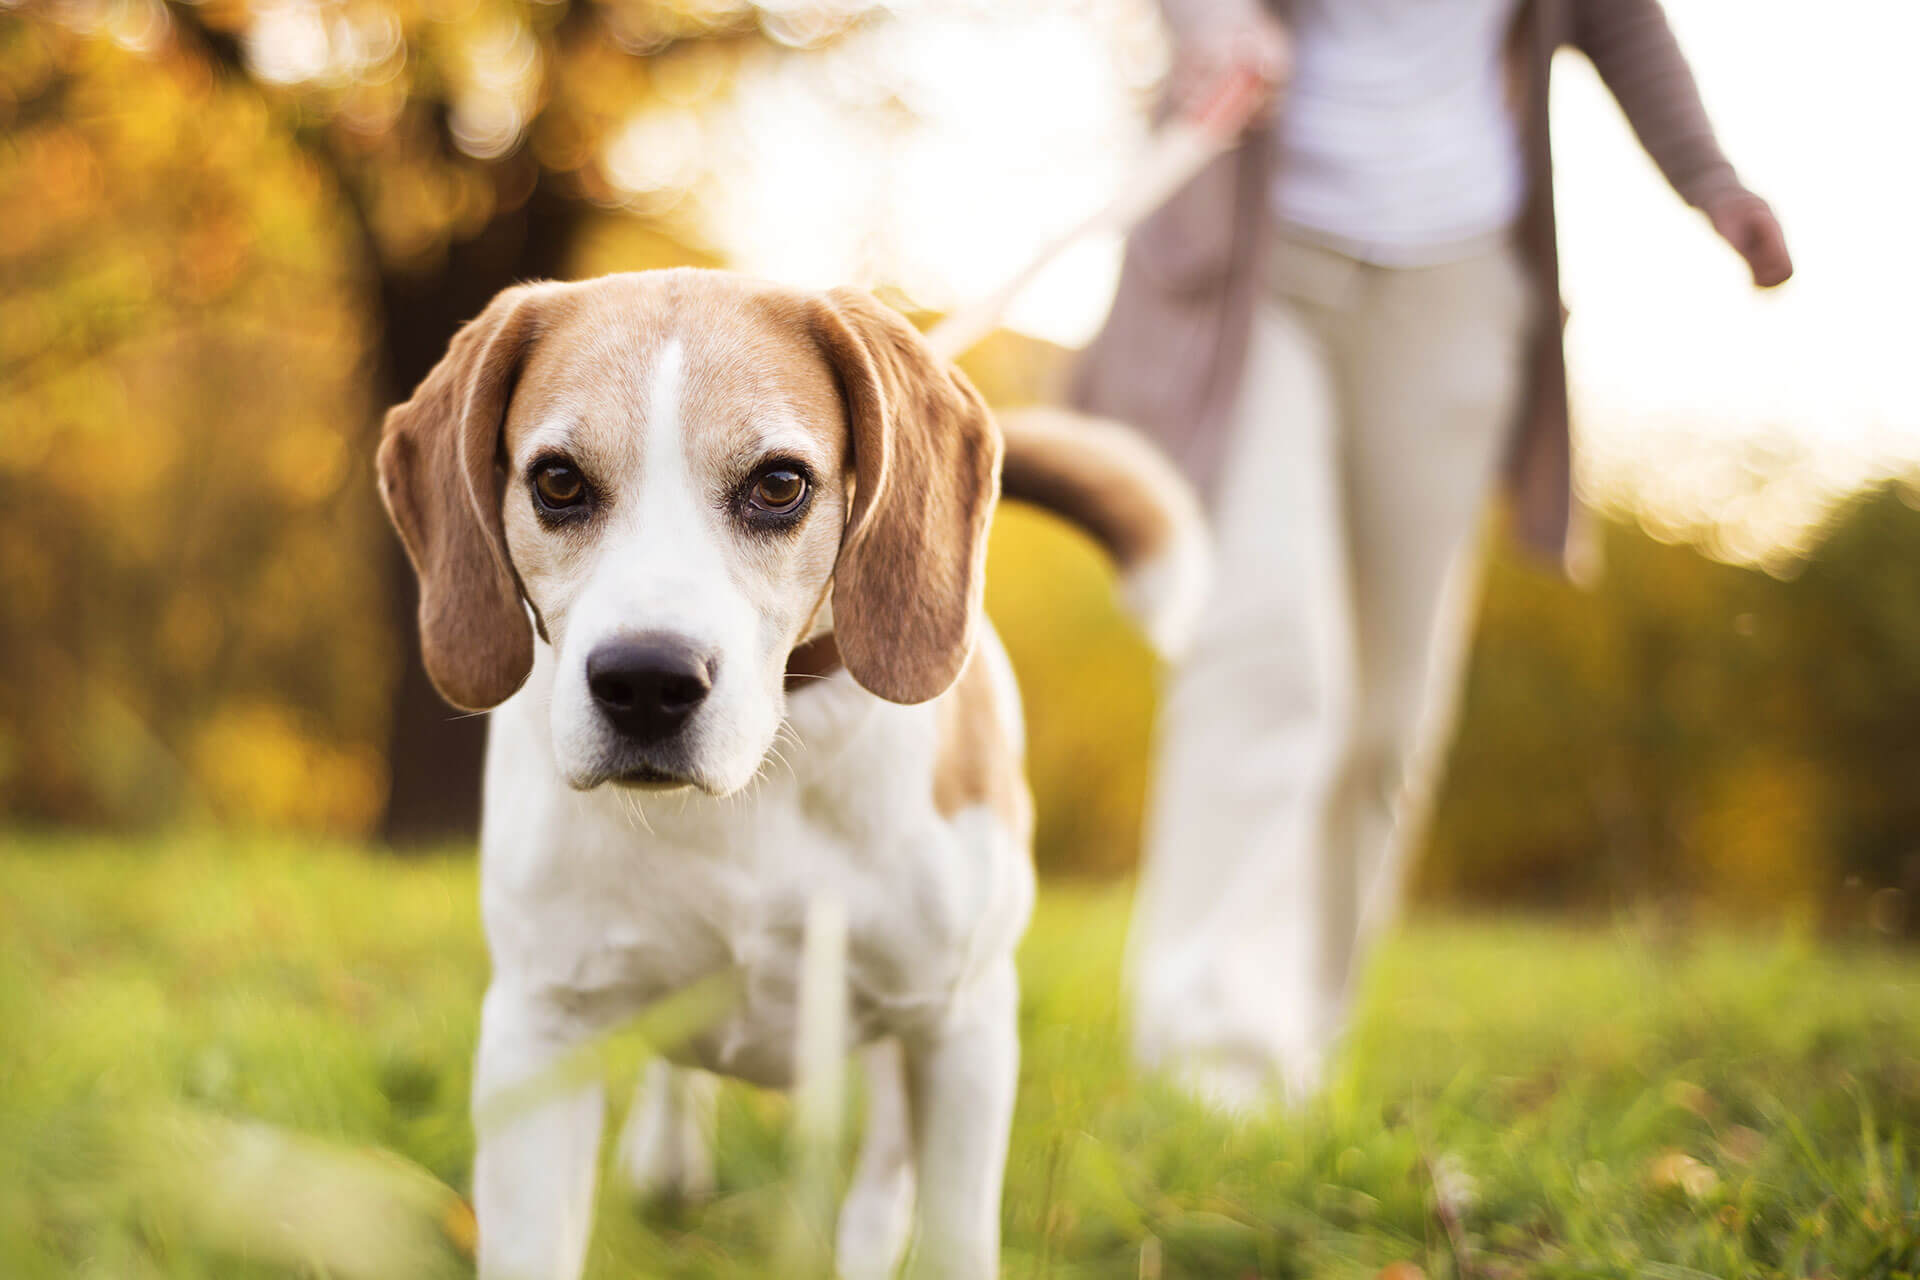 white and brown dog on leash outside - tips for leaving your dog home alone